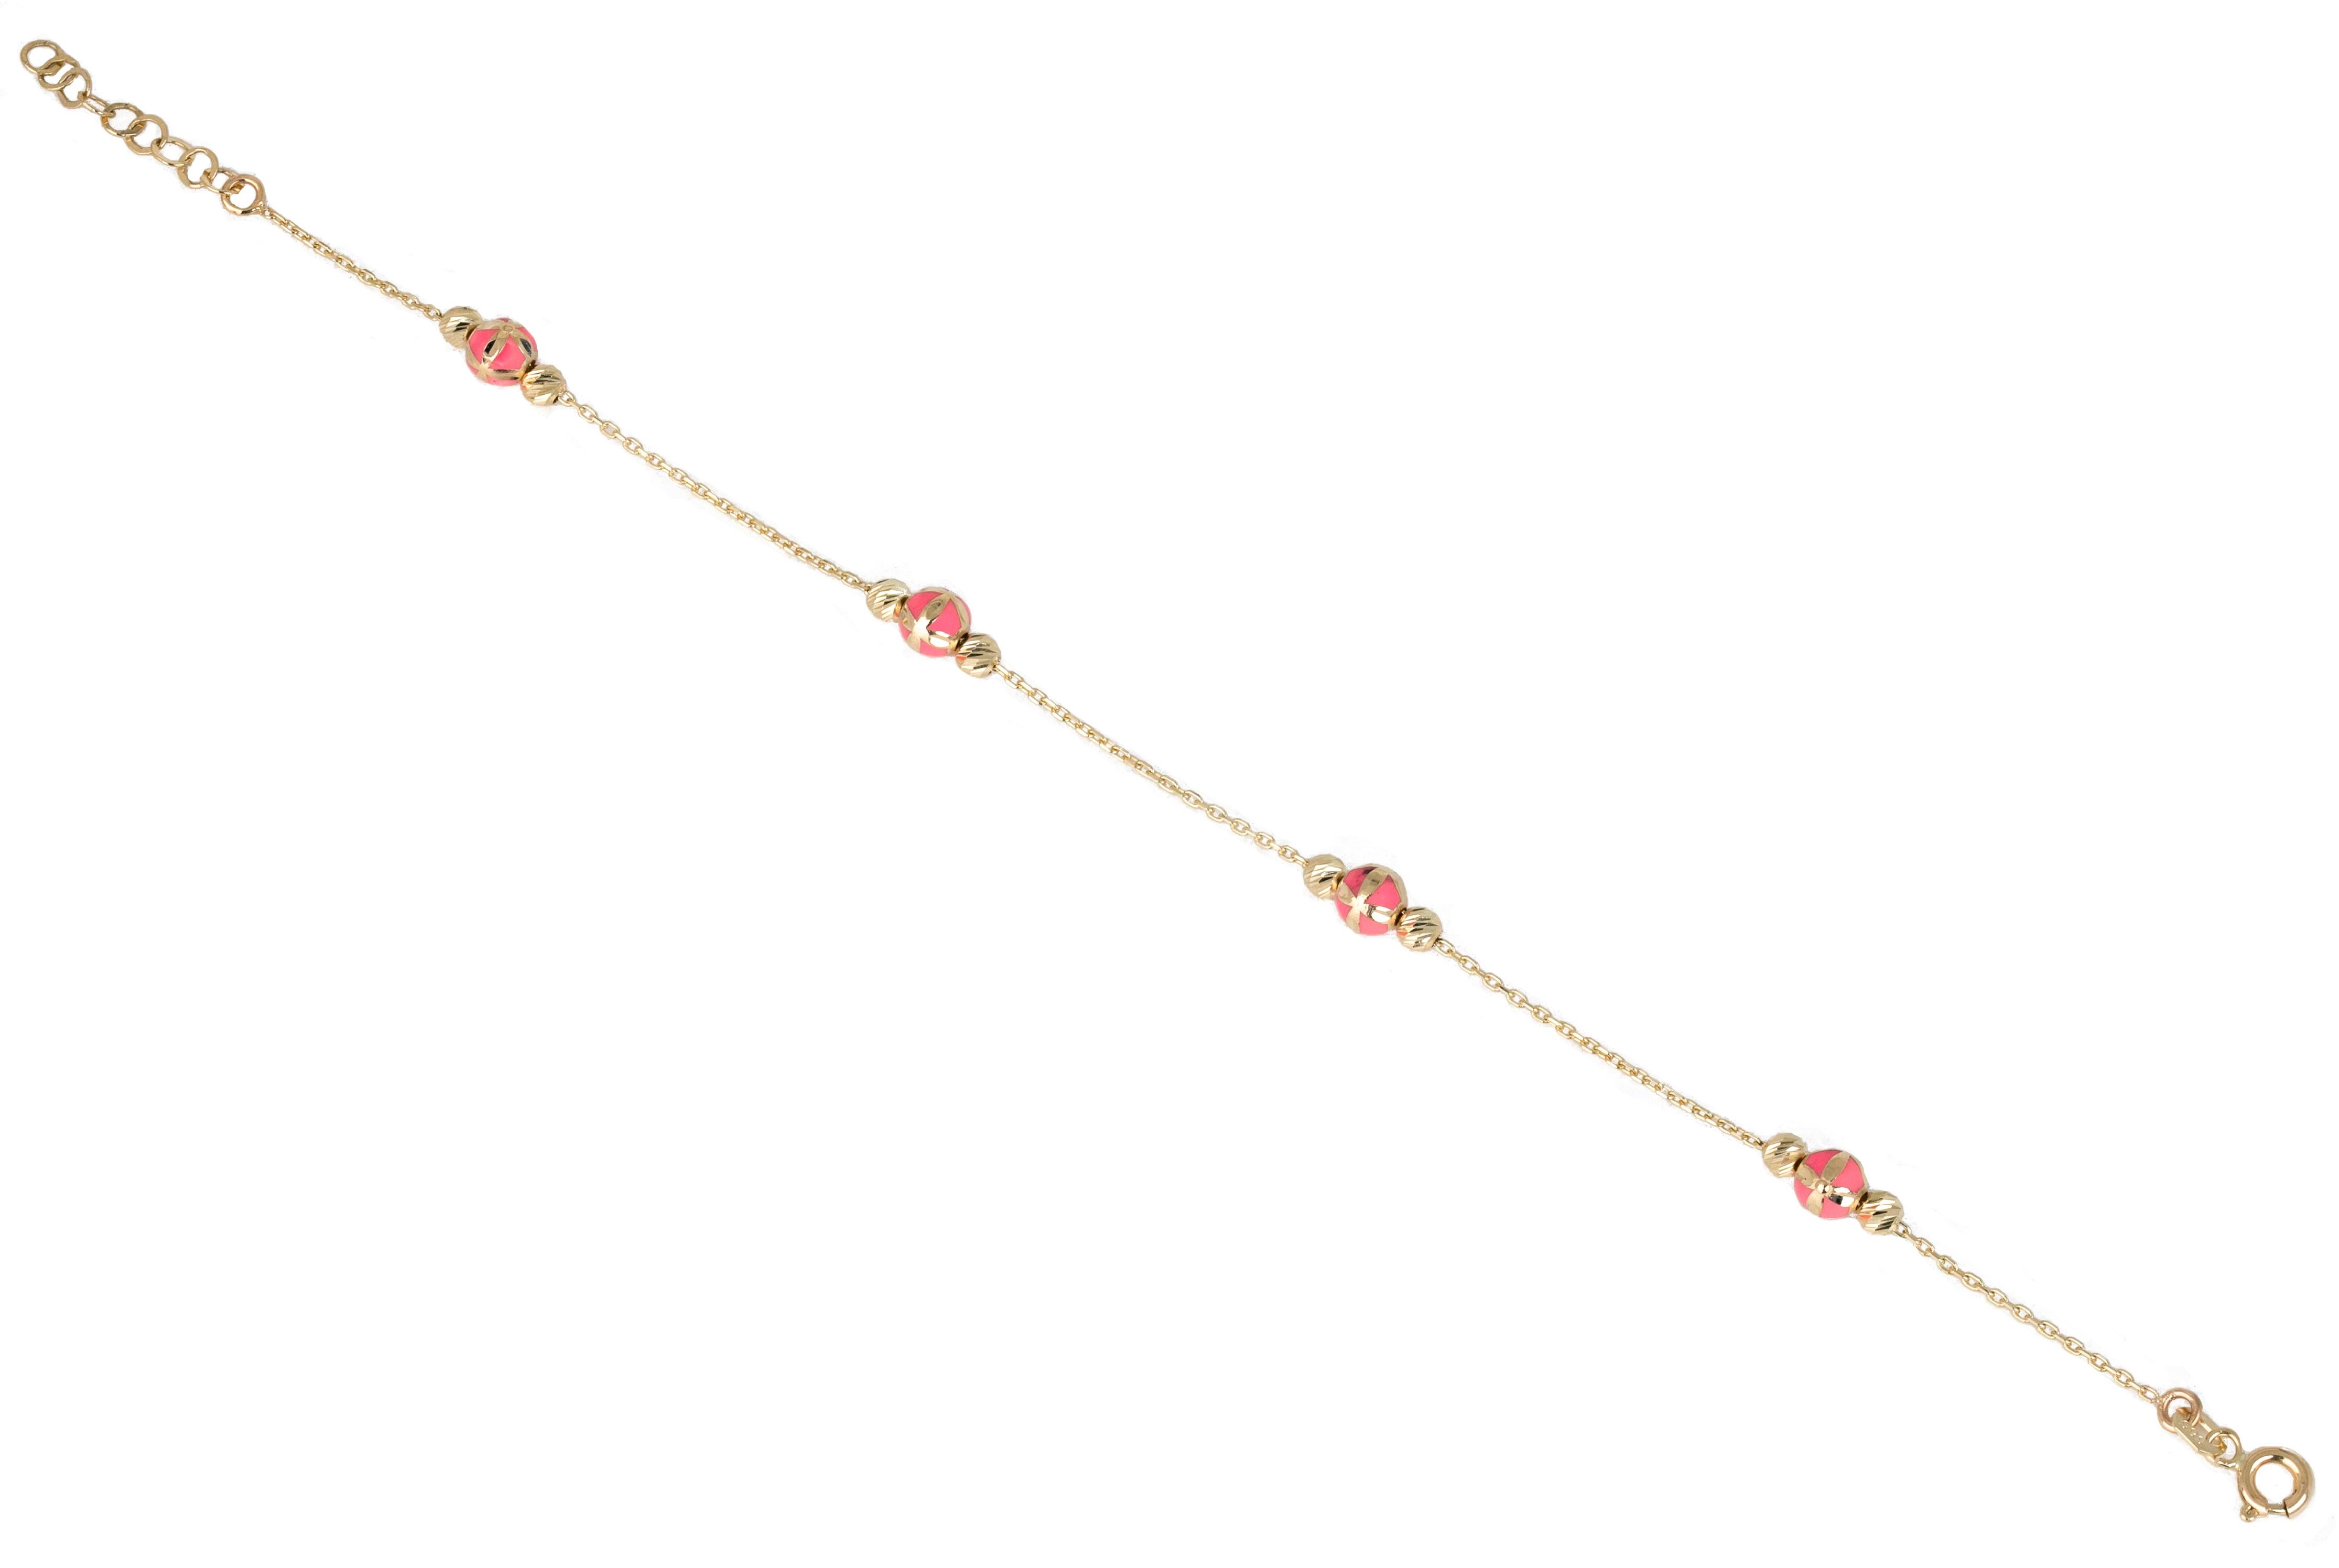 14K Gold Bracelet Pink Enameled and Dorica Collected Model Bracelet

Solid gold.
With hallmark.

Total Weight: 2,07 gr.
Size: 19.00 cm

*It is produced by placing two Dorica Balls on a forse chain and a large ball with Pink Enamel and a pattern in